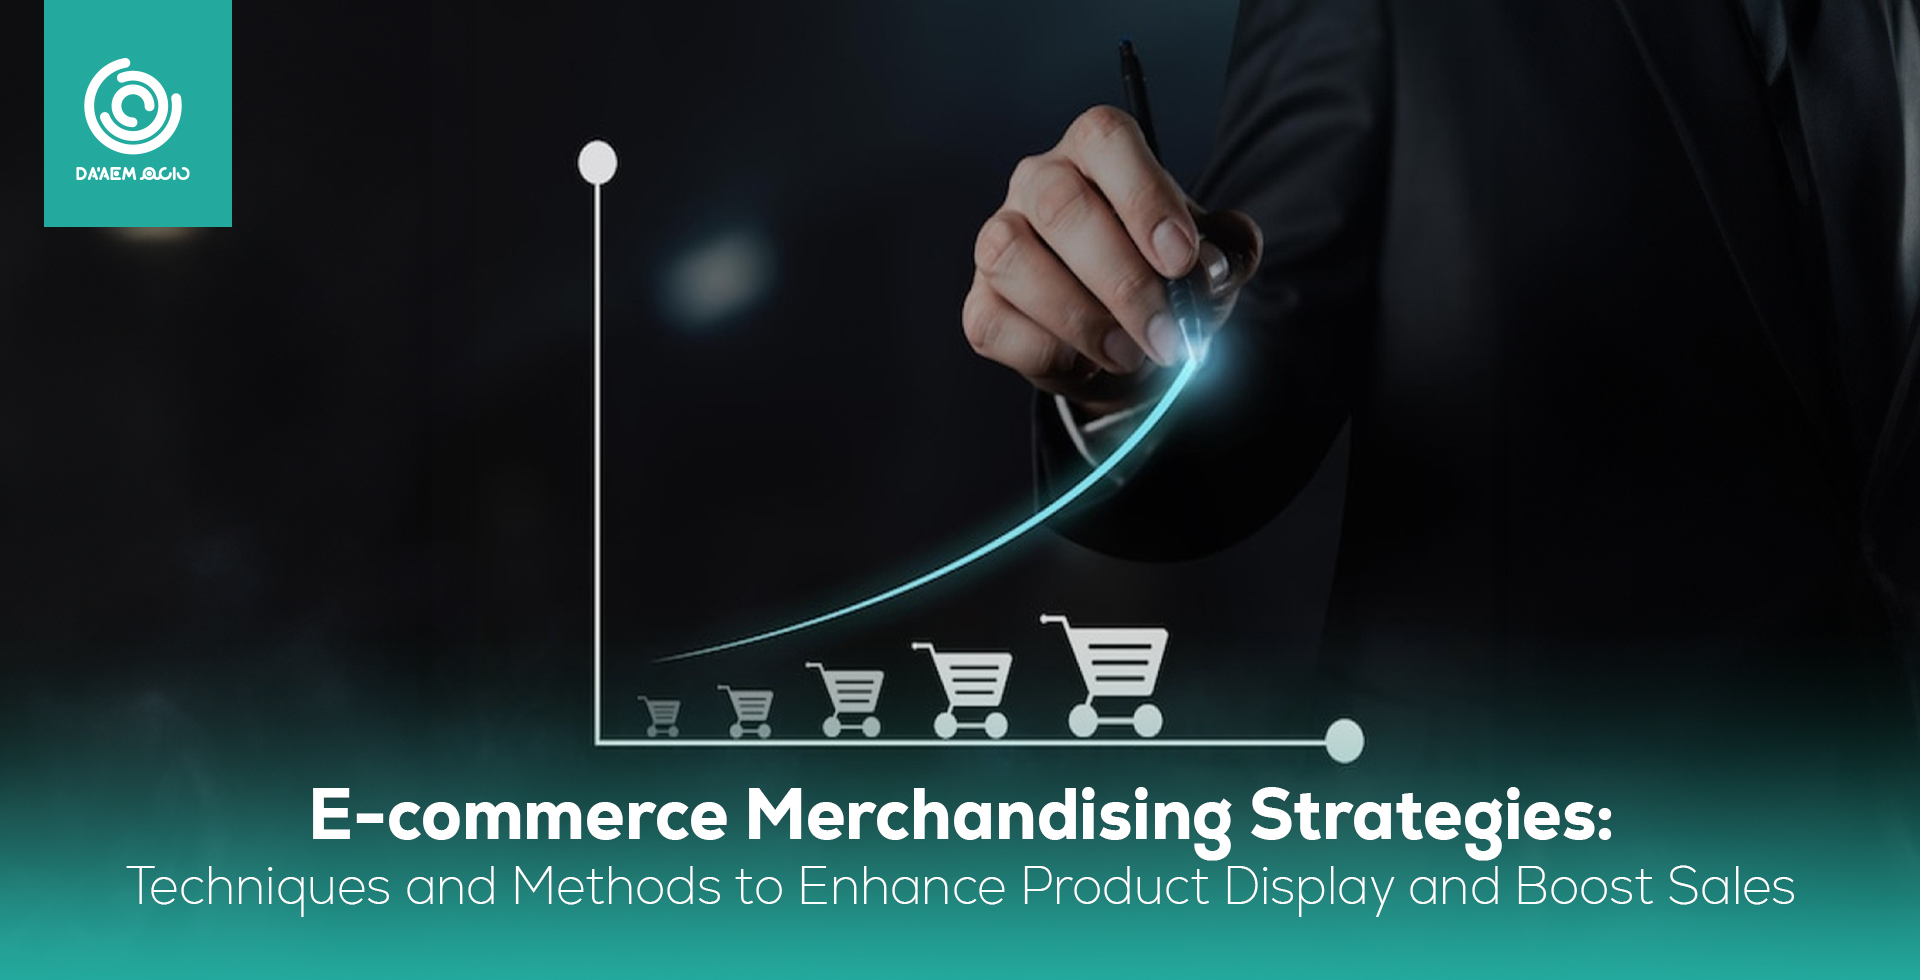 E-commerce Merchandising Strategies: Techniques and Methods to Enhance Product Display and Boost Sales